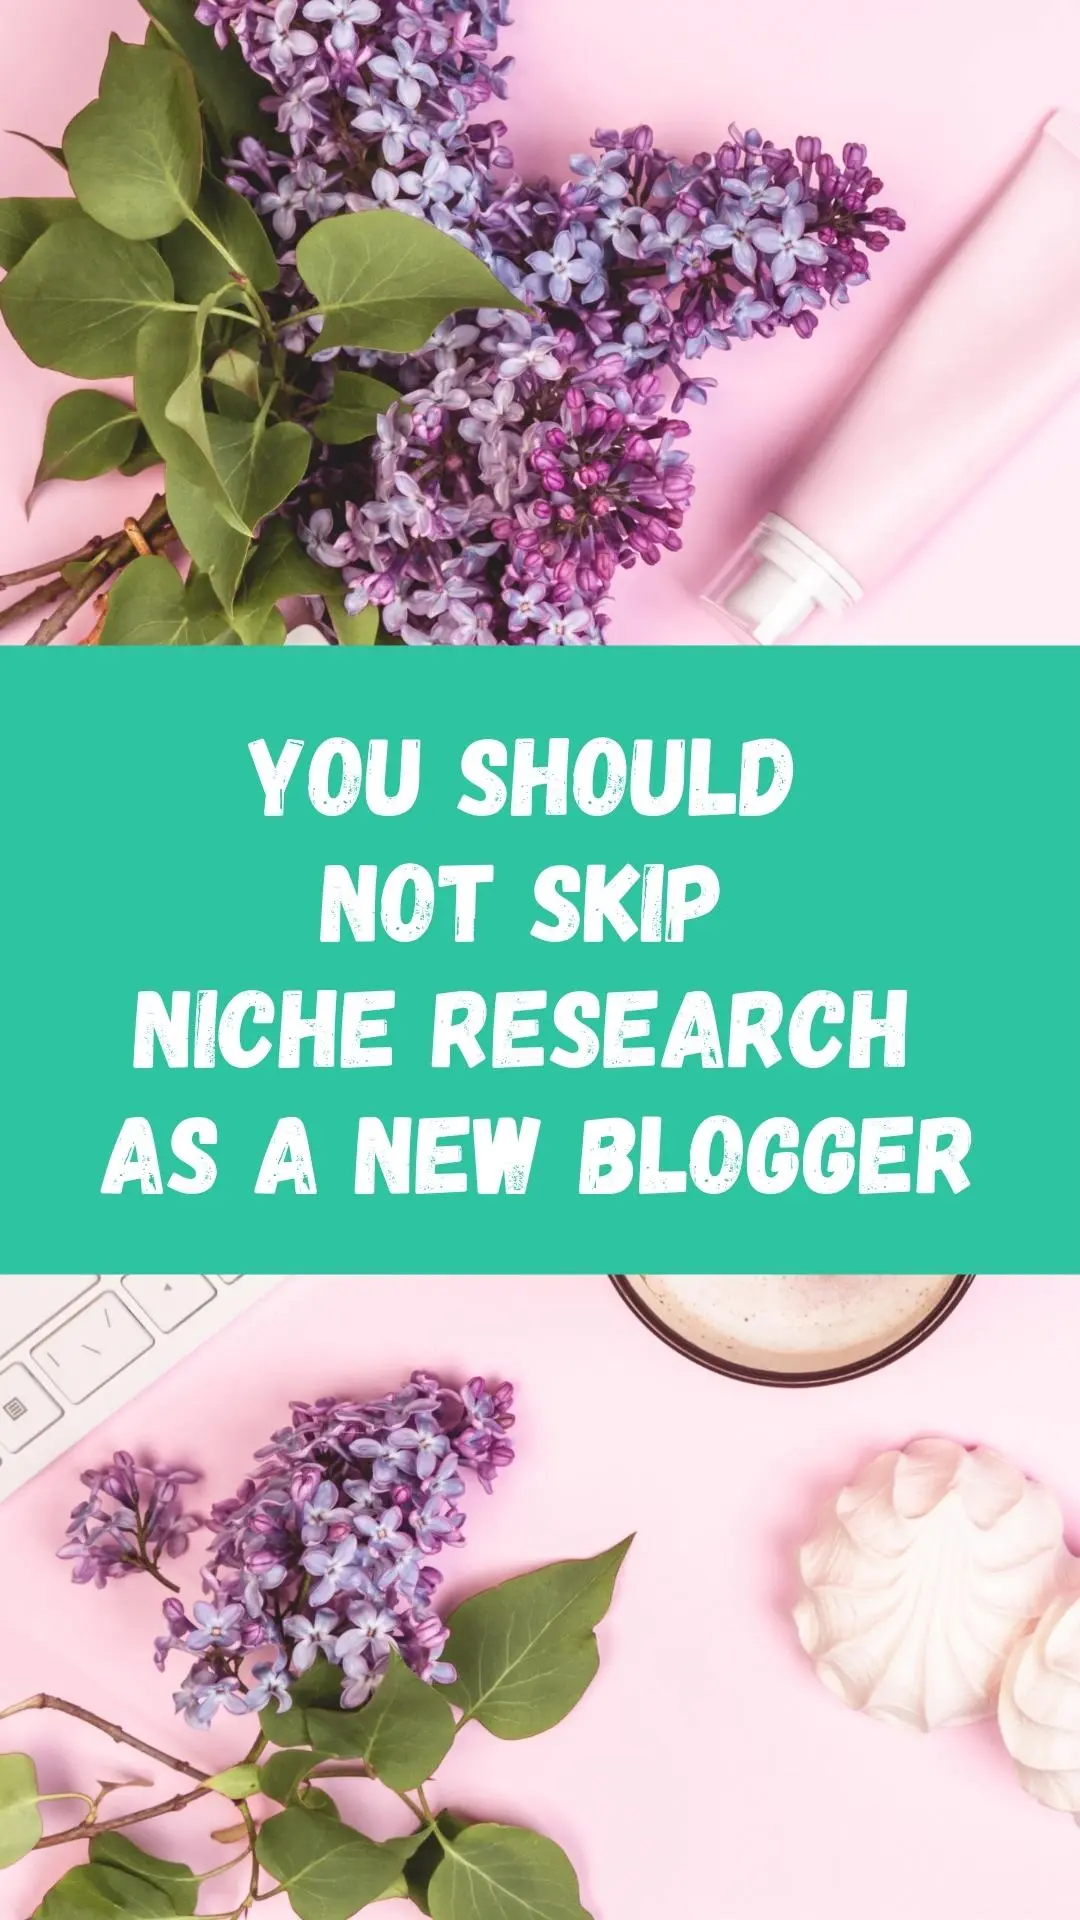 You should not skip niche research as a new blogger